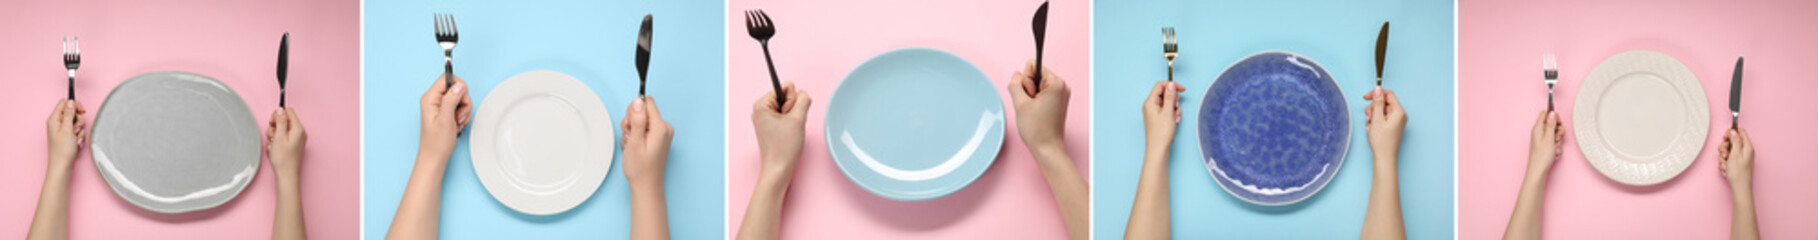 People with cutlery and clean plates on color backgrounds, top view. Collection of photos